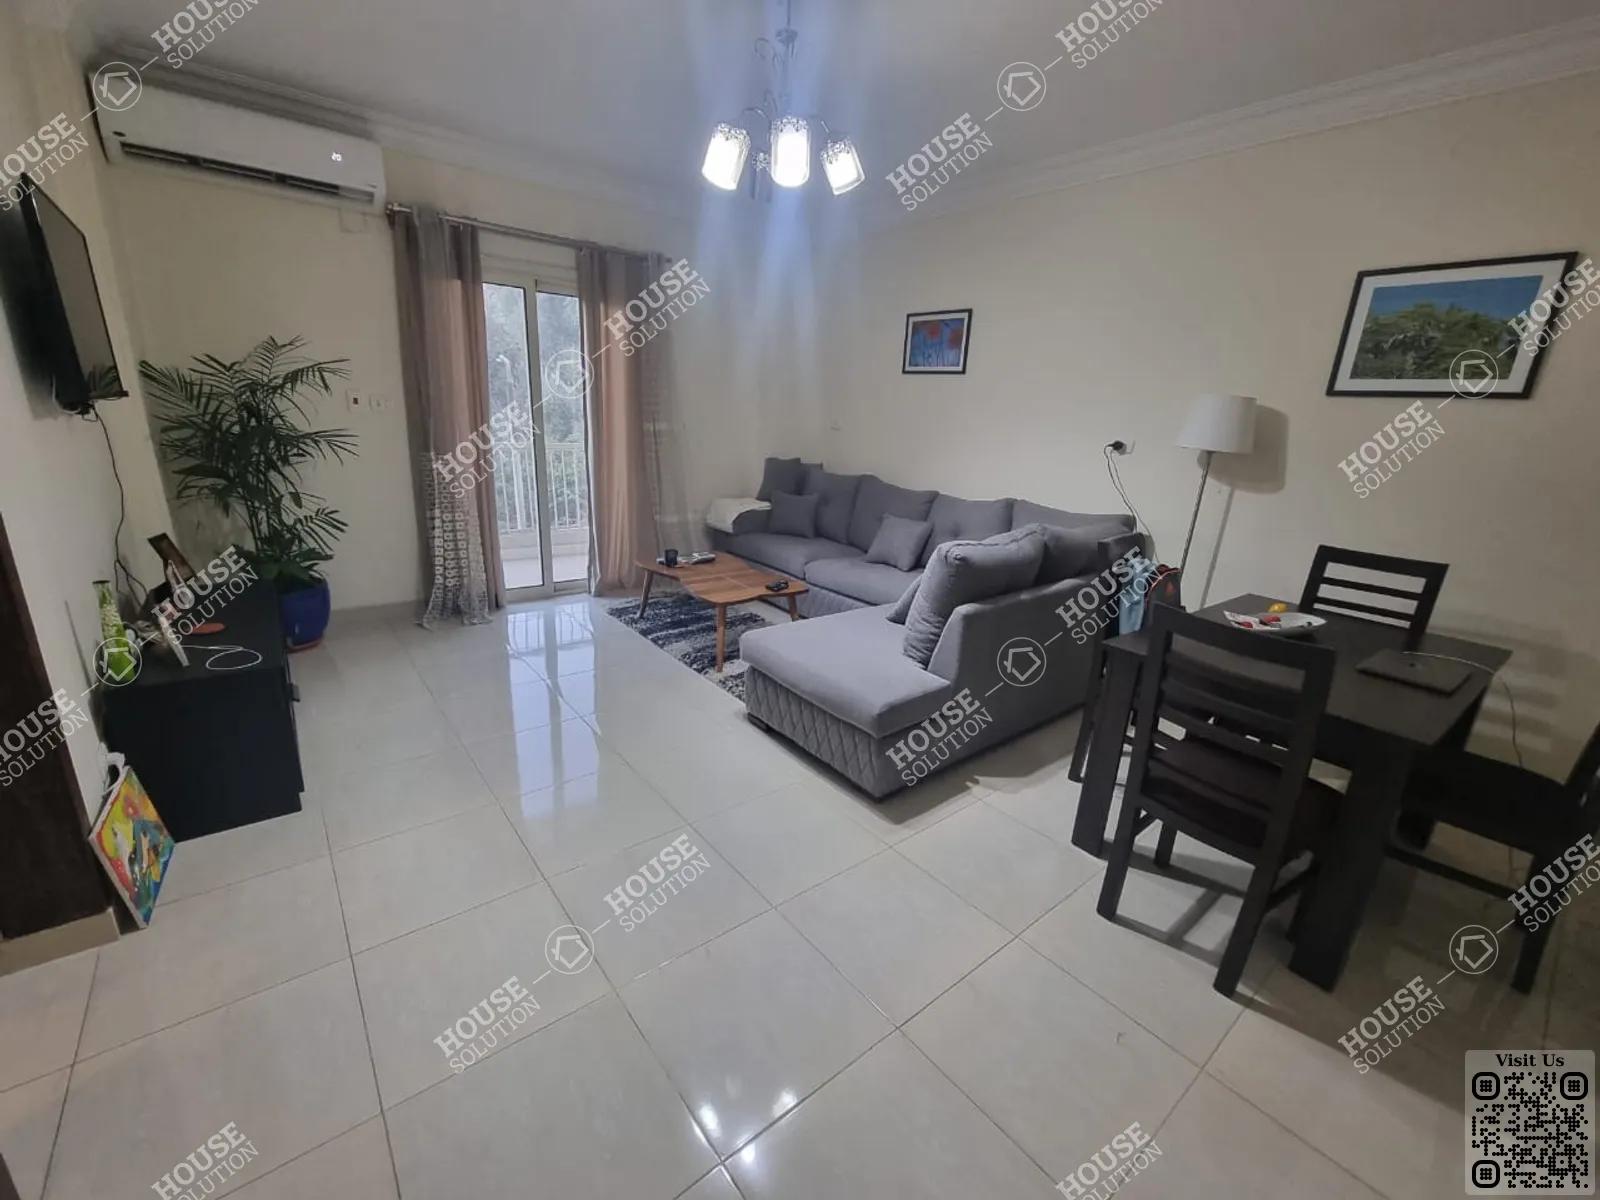 RECEPTION  @ Apartments For Rent In Maadi Maadi Degla Area: 150 m² consists of 2 Bedrooms 2 Bathrooms Modern furnished 5 stars #5612-1